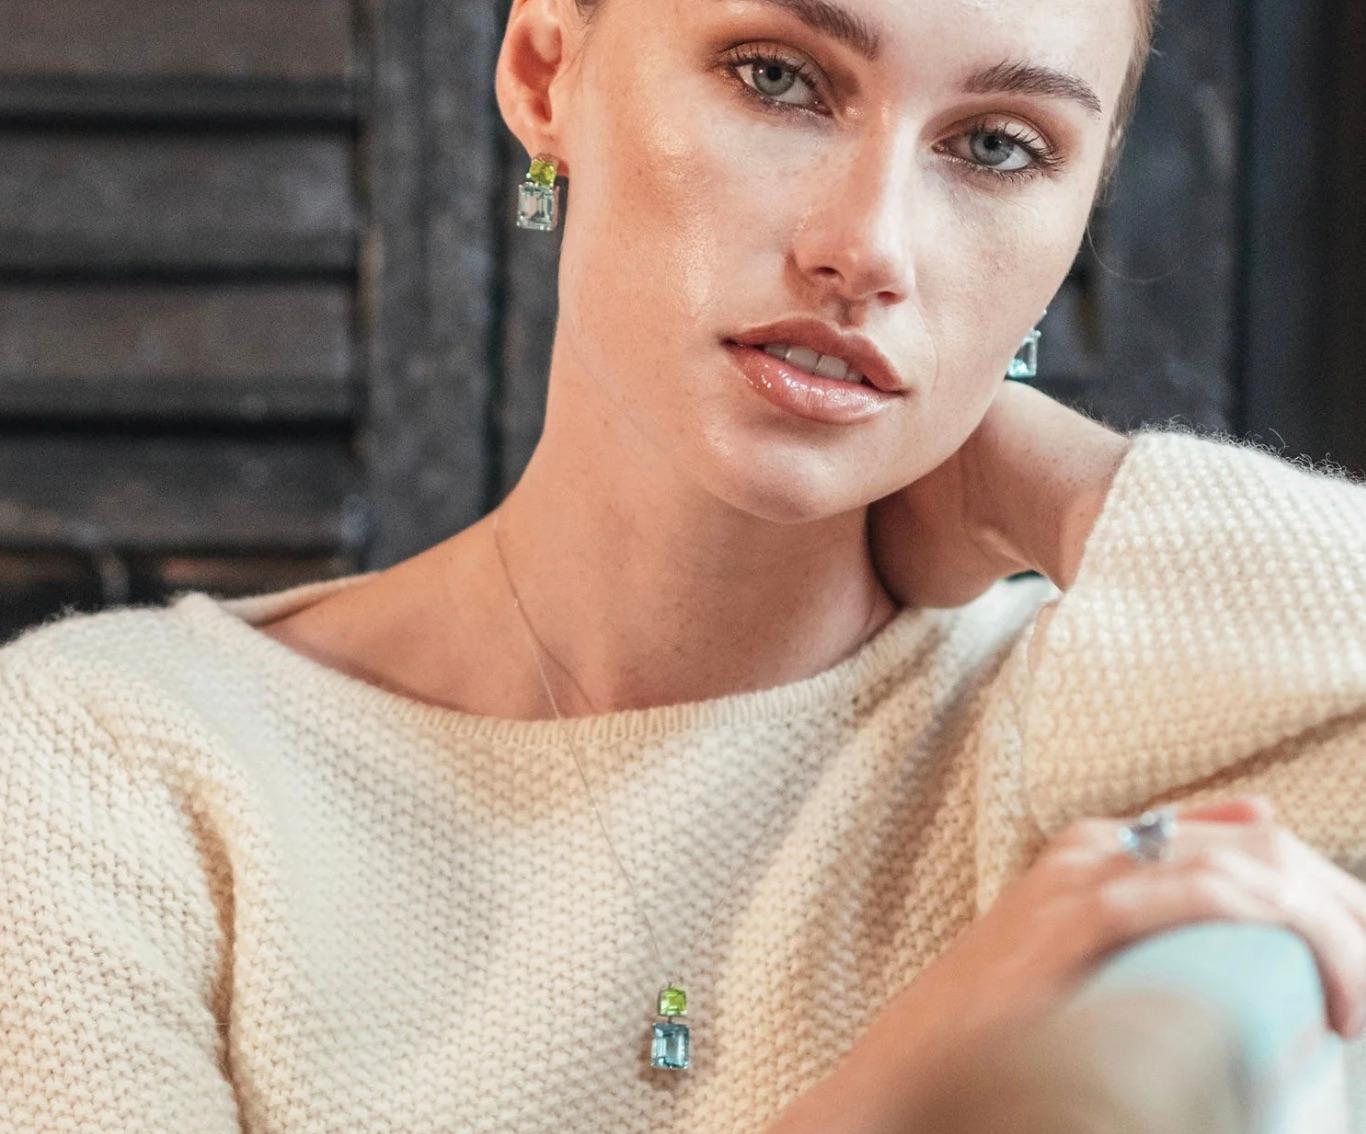 These vivacious 9ct yellow gold gemstone earrings from the Andalusian Collection feature two exquisite octagon cut stones: bright green peridot with sparkling sky blue topaz, inspired by the flourishing foliage and azure skies of southern